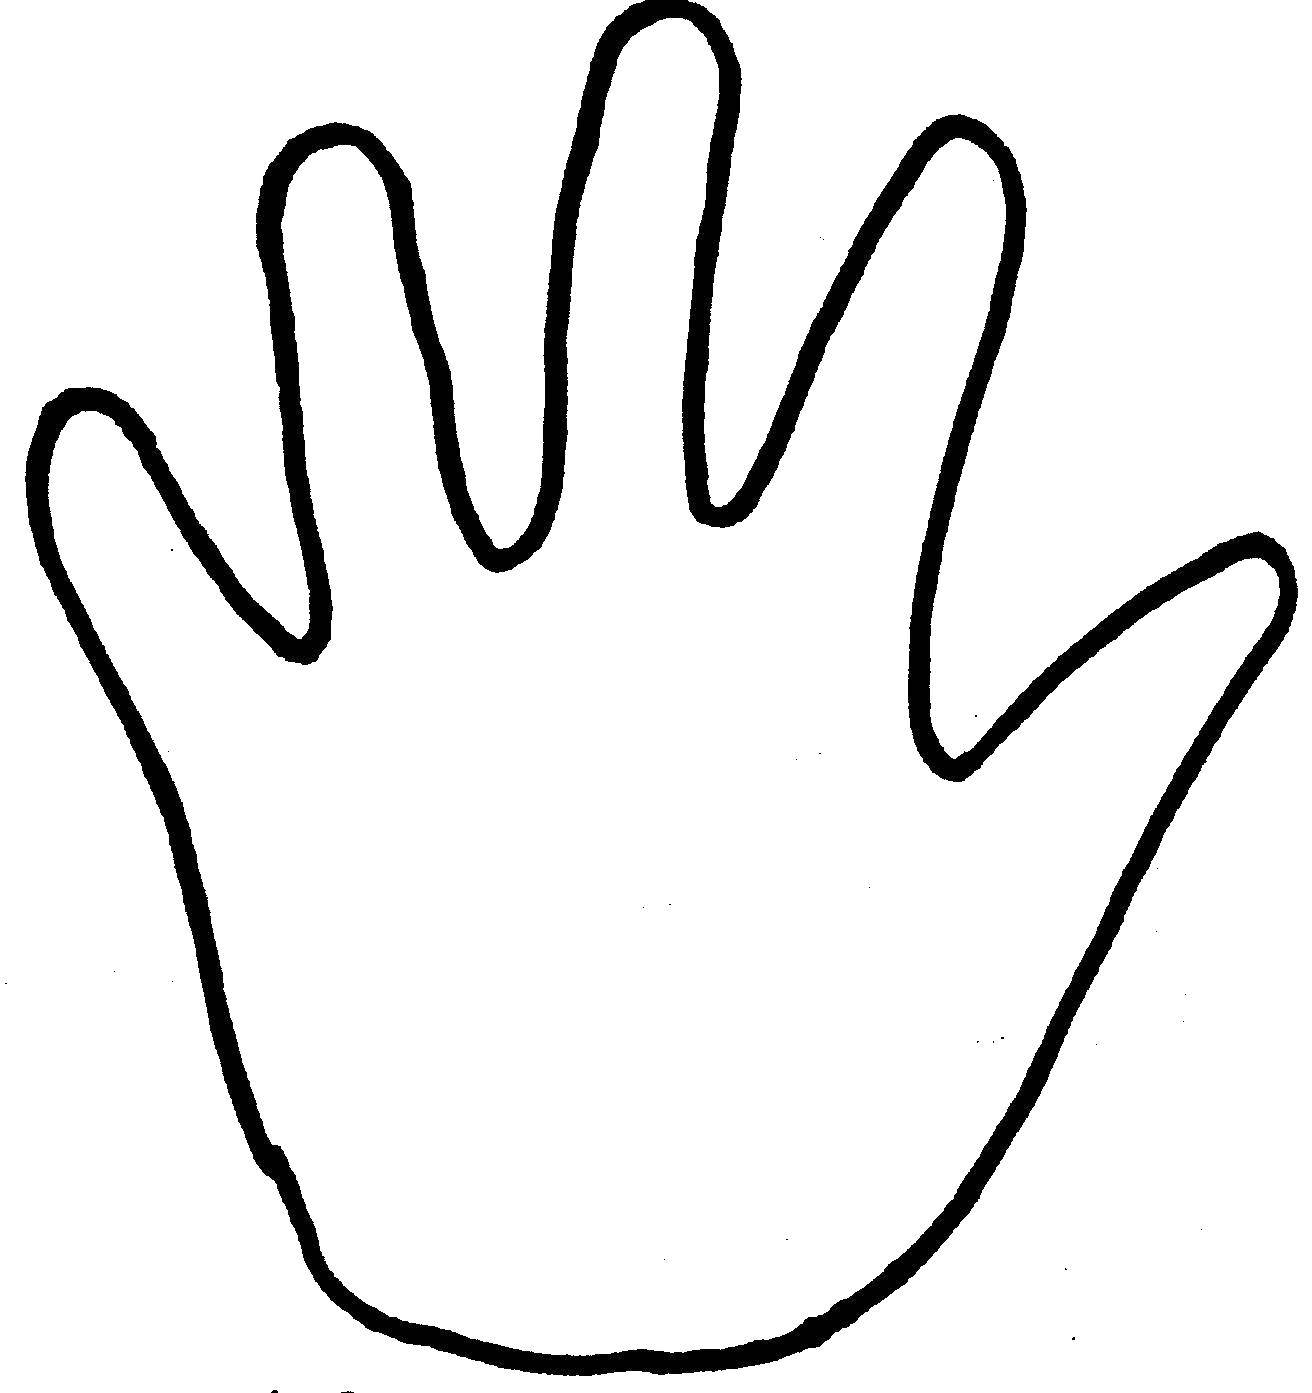 Coloring Fingers. Category The contour of the hands and palms to cut. Tags:  Hand, brush.